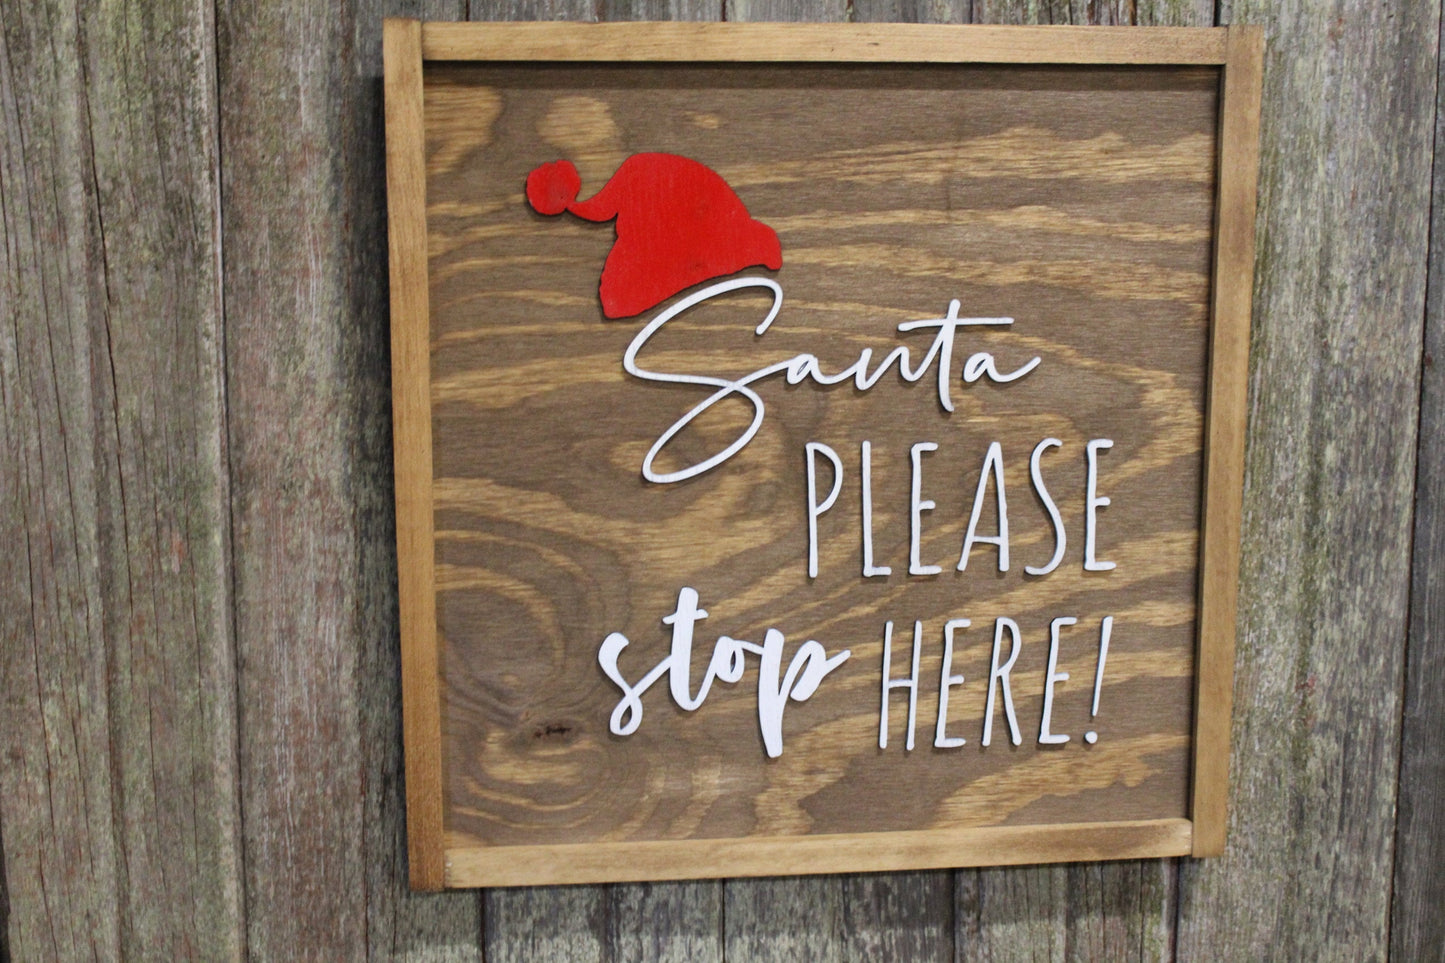 Santa Please Stop Here Raised Text Wood Sign 3D Stands off the Board Holiday Christmas Wooden Primitive Wall Décor Decoration Framed